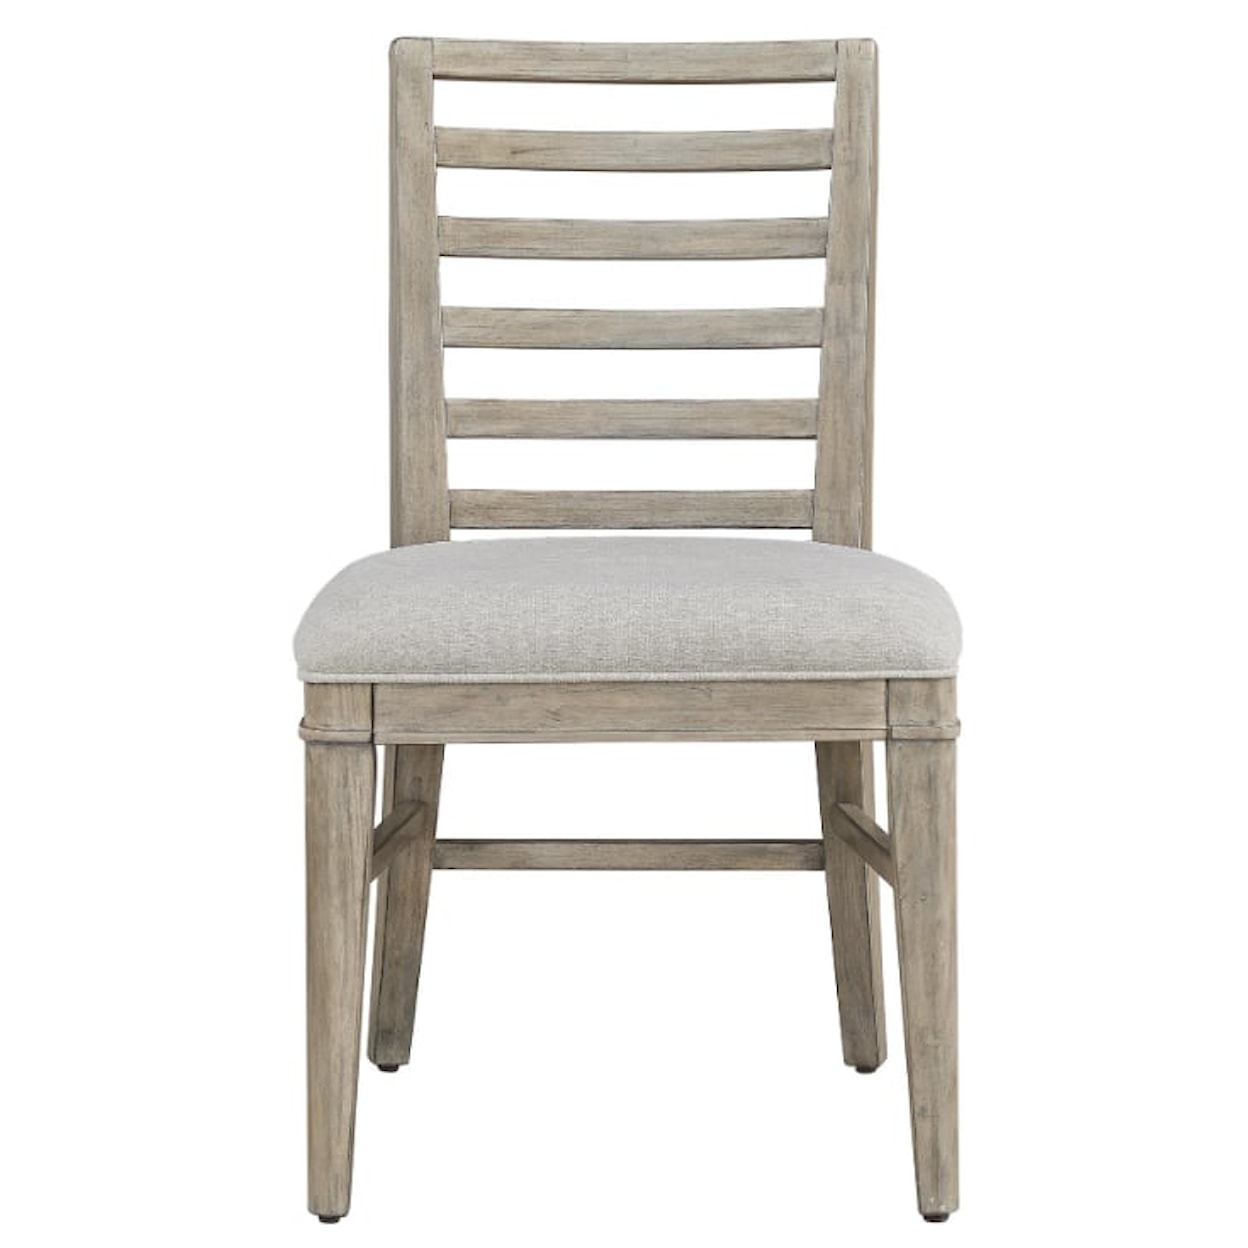 American Woodcrafters Meadowbrook Dining Chair